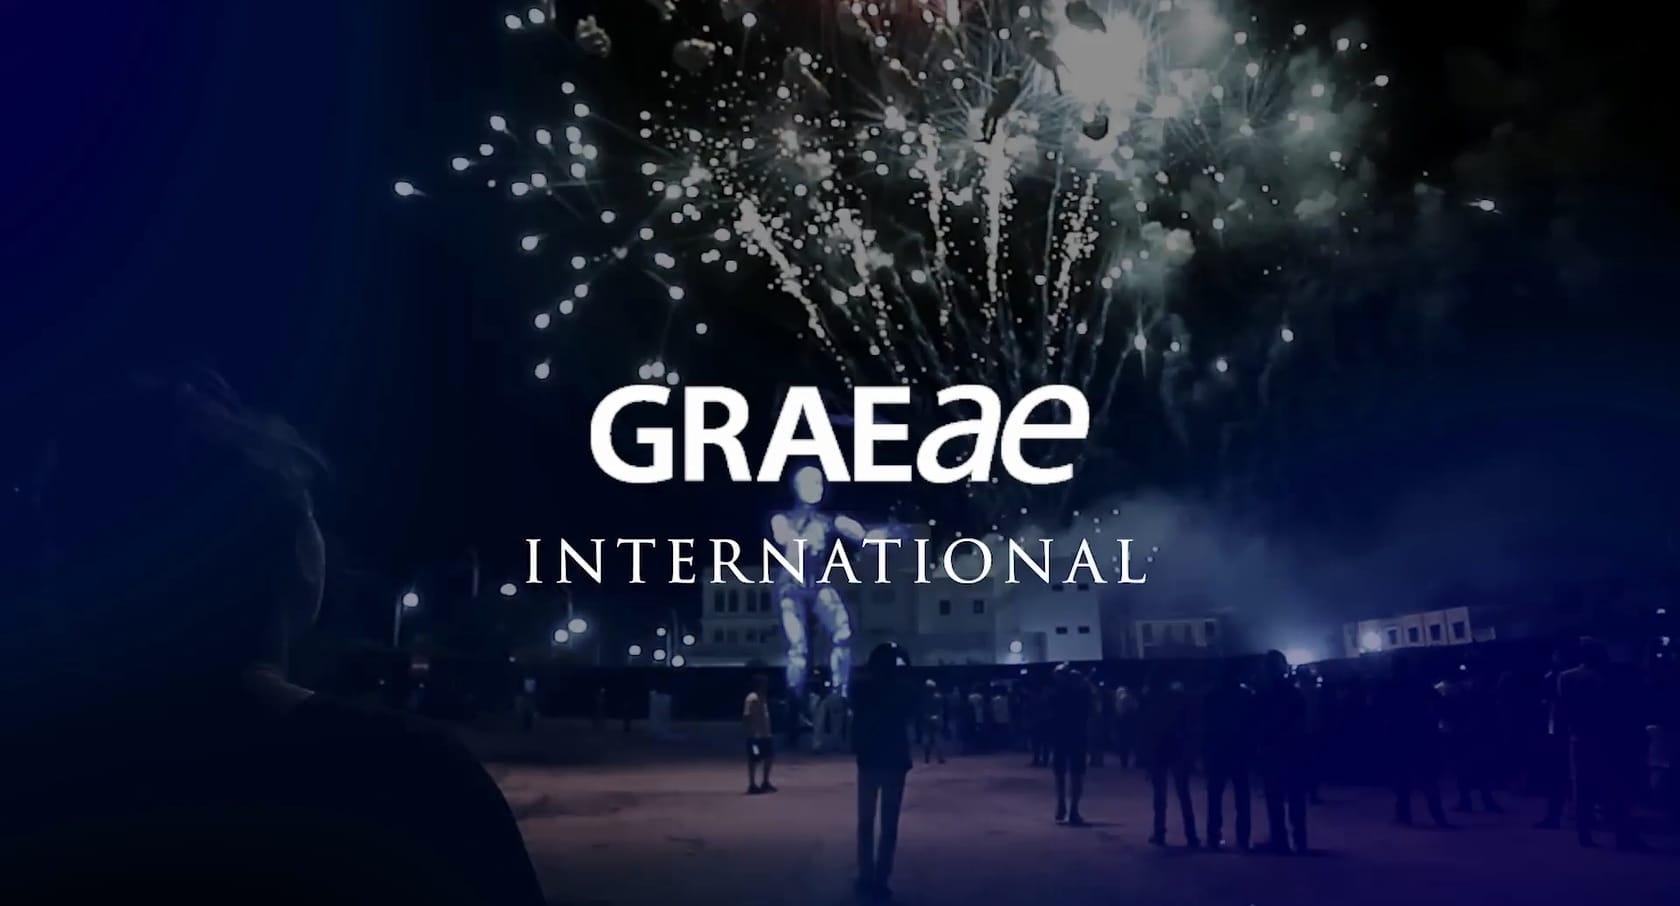 A photograph of fire works and a huge marionette puppet being operated through a crowd of people, provides the backdrop for white text that reads "Graeae International".